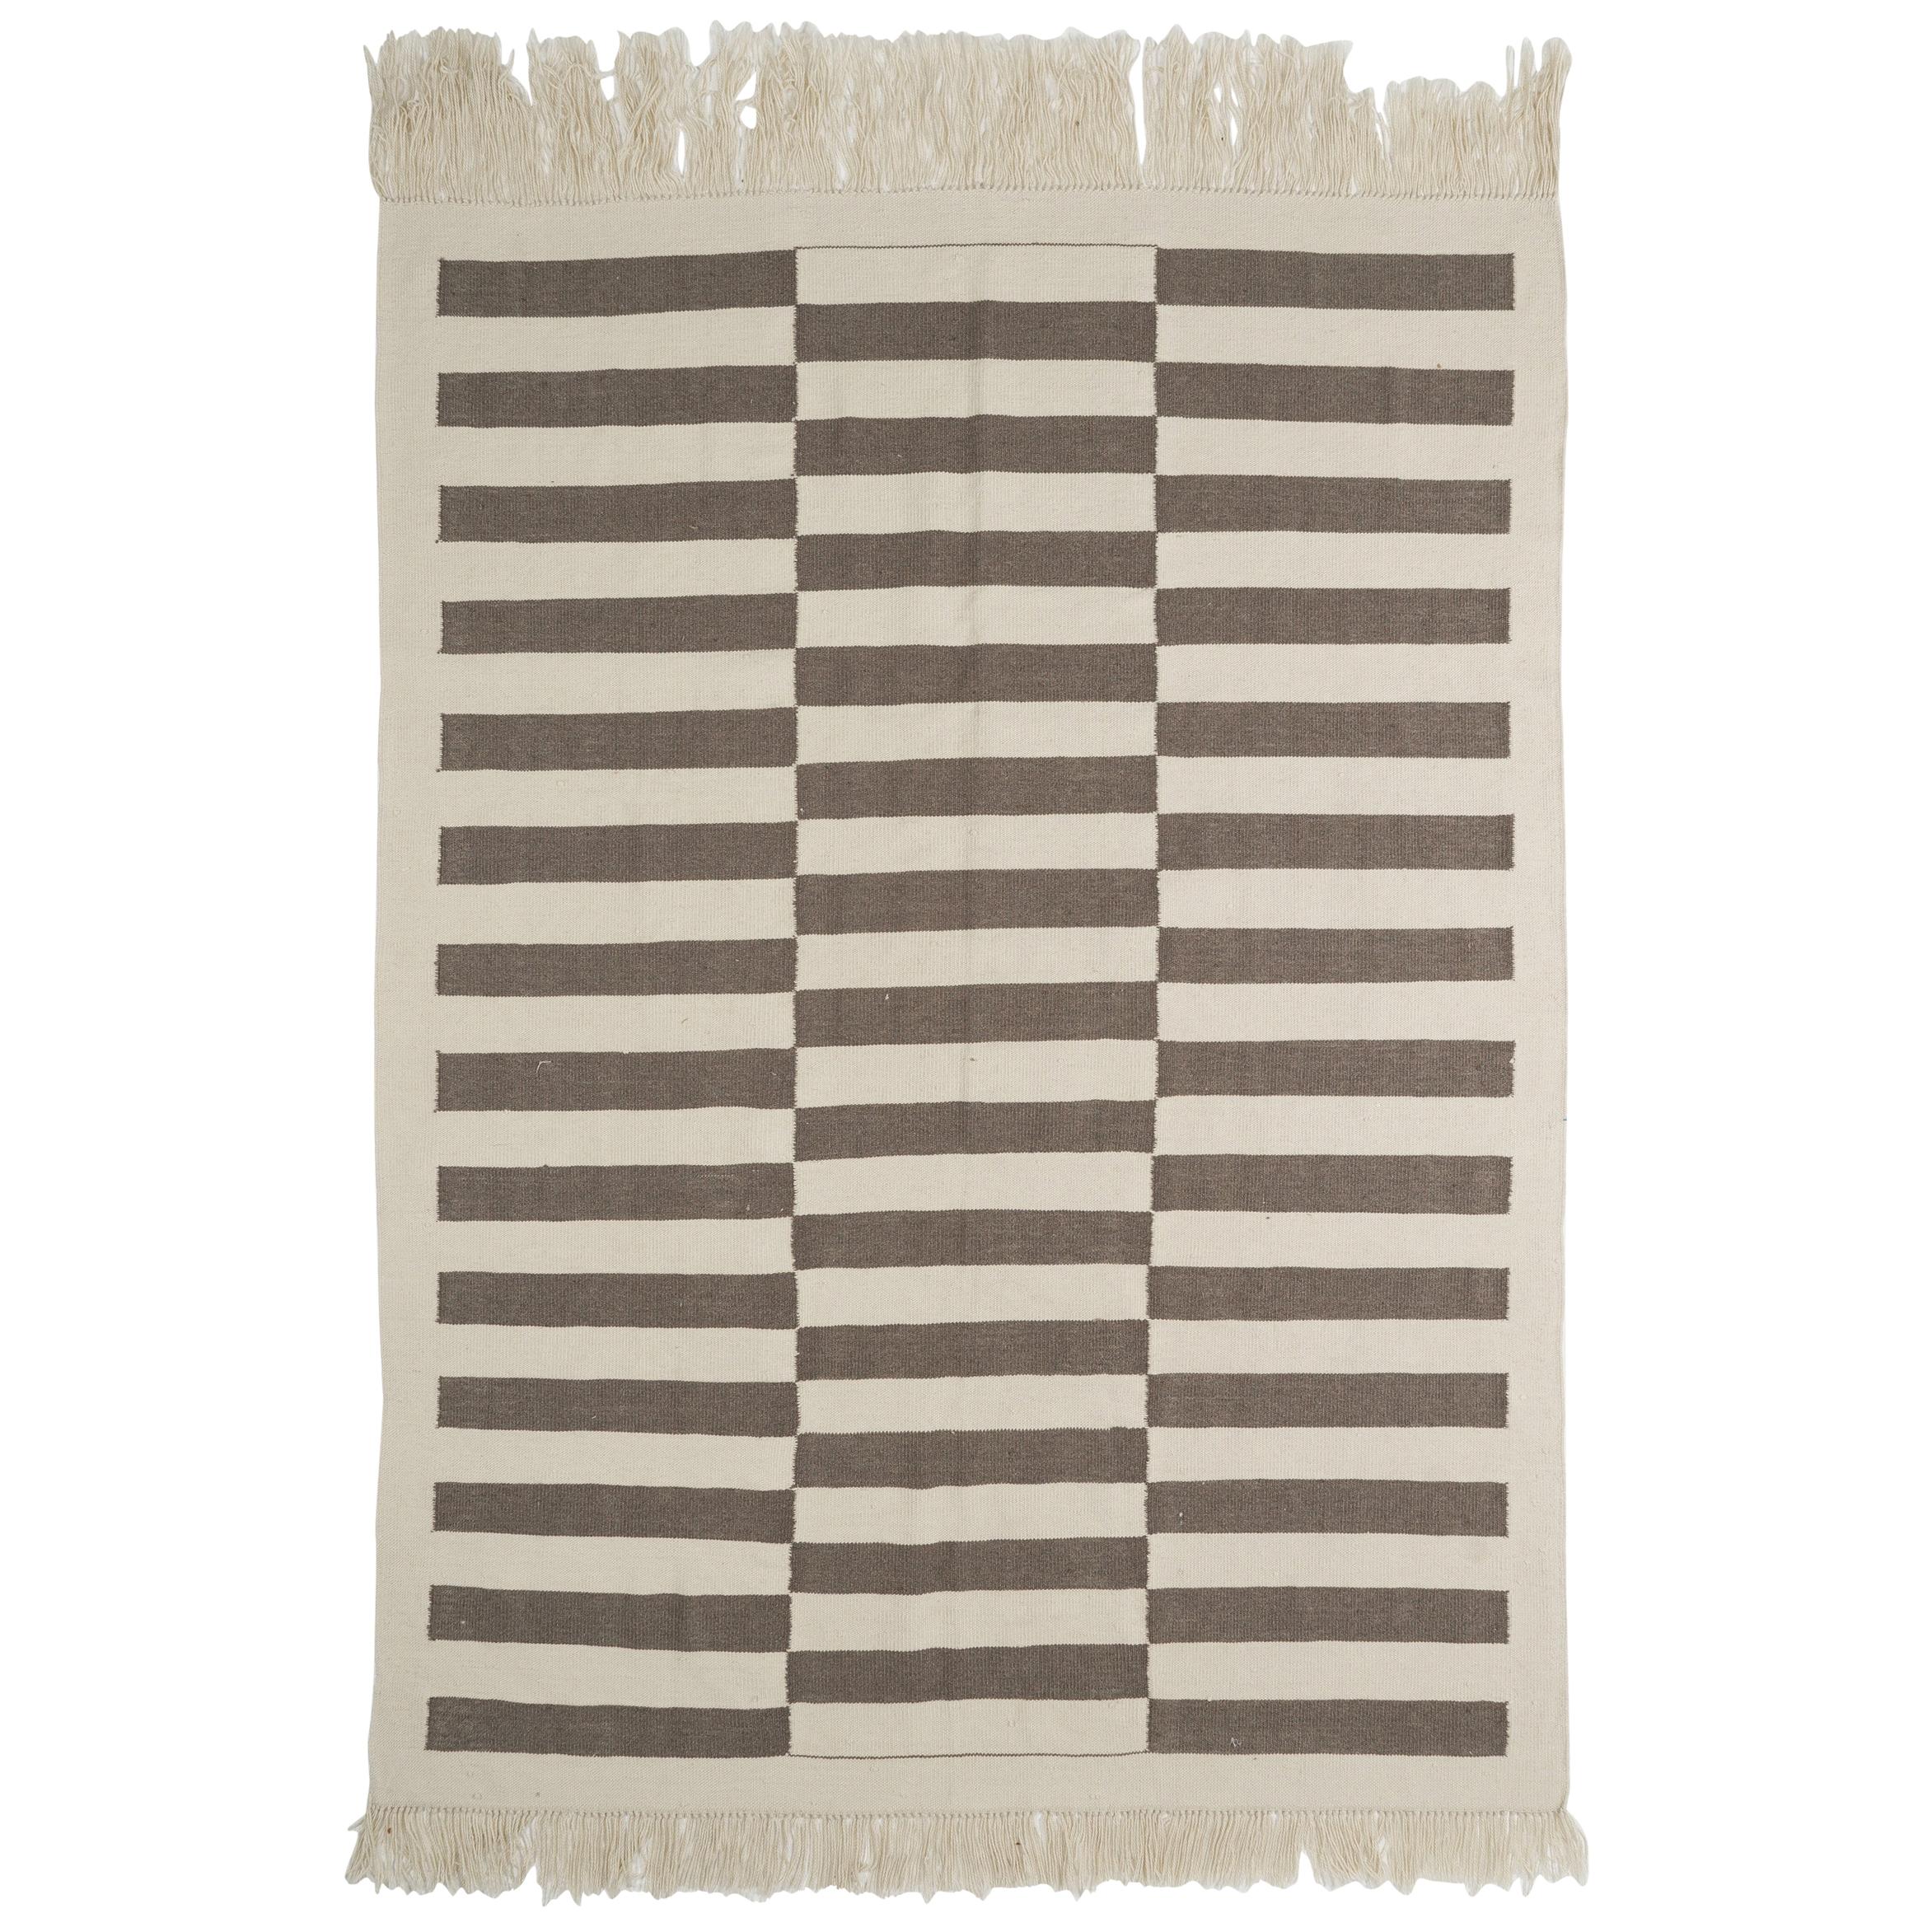 8x10.8 Ft Hand-Woven Turkish Natural Undyed Wool Kilim. Custom Options Available For Sale